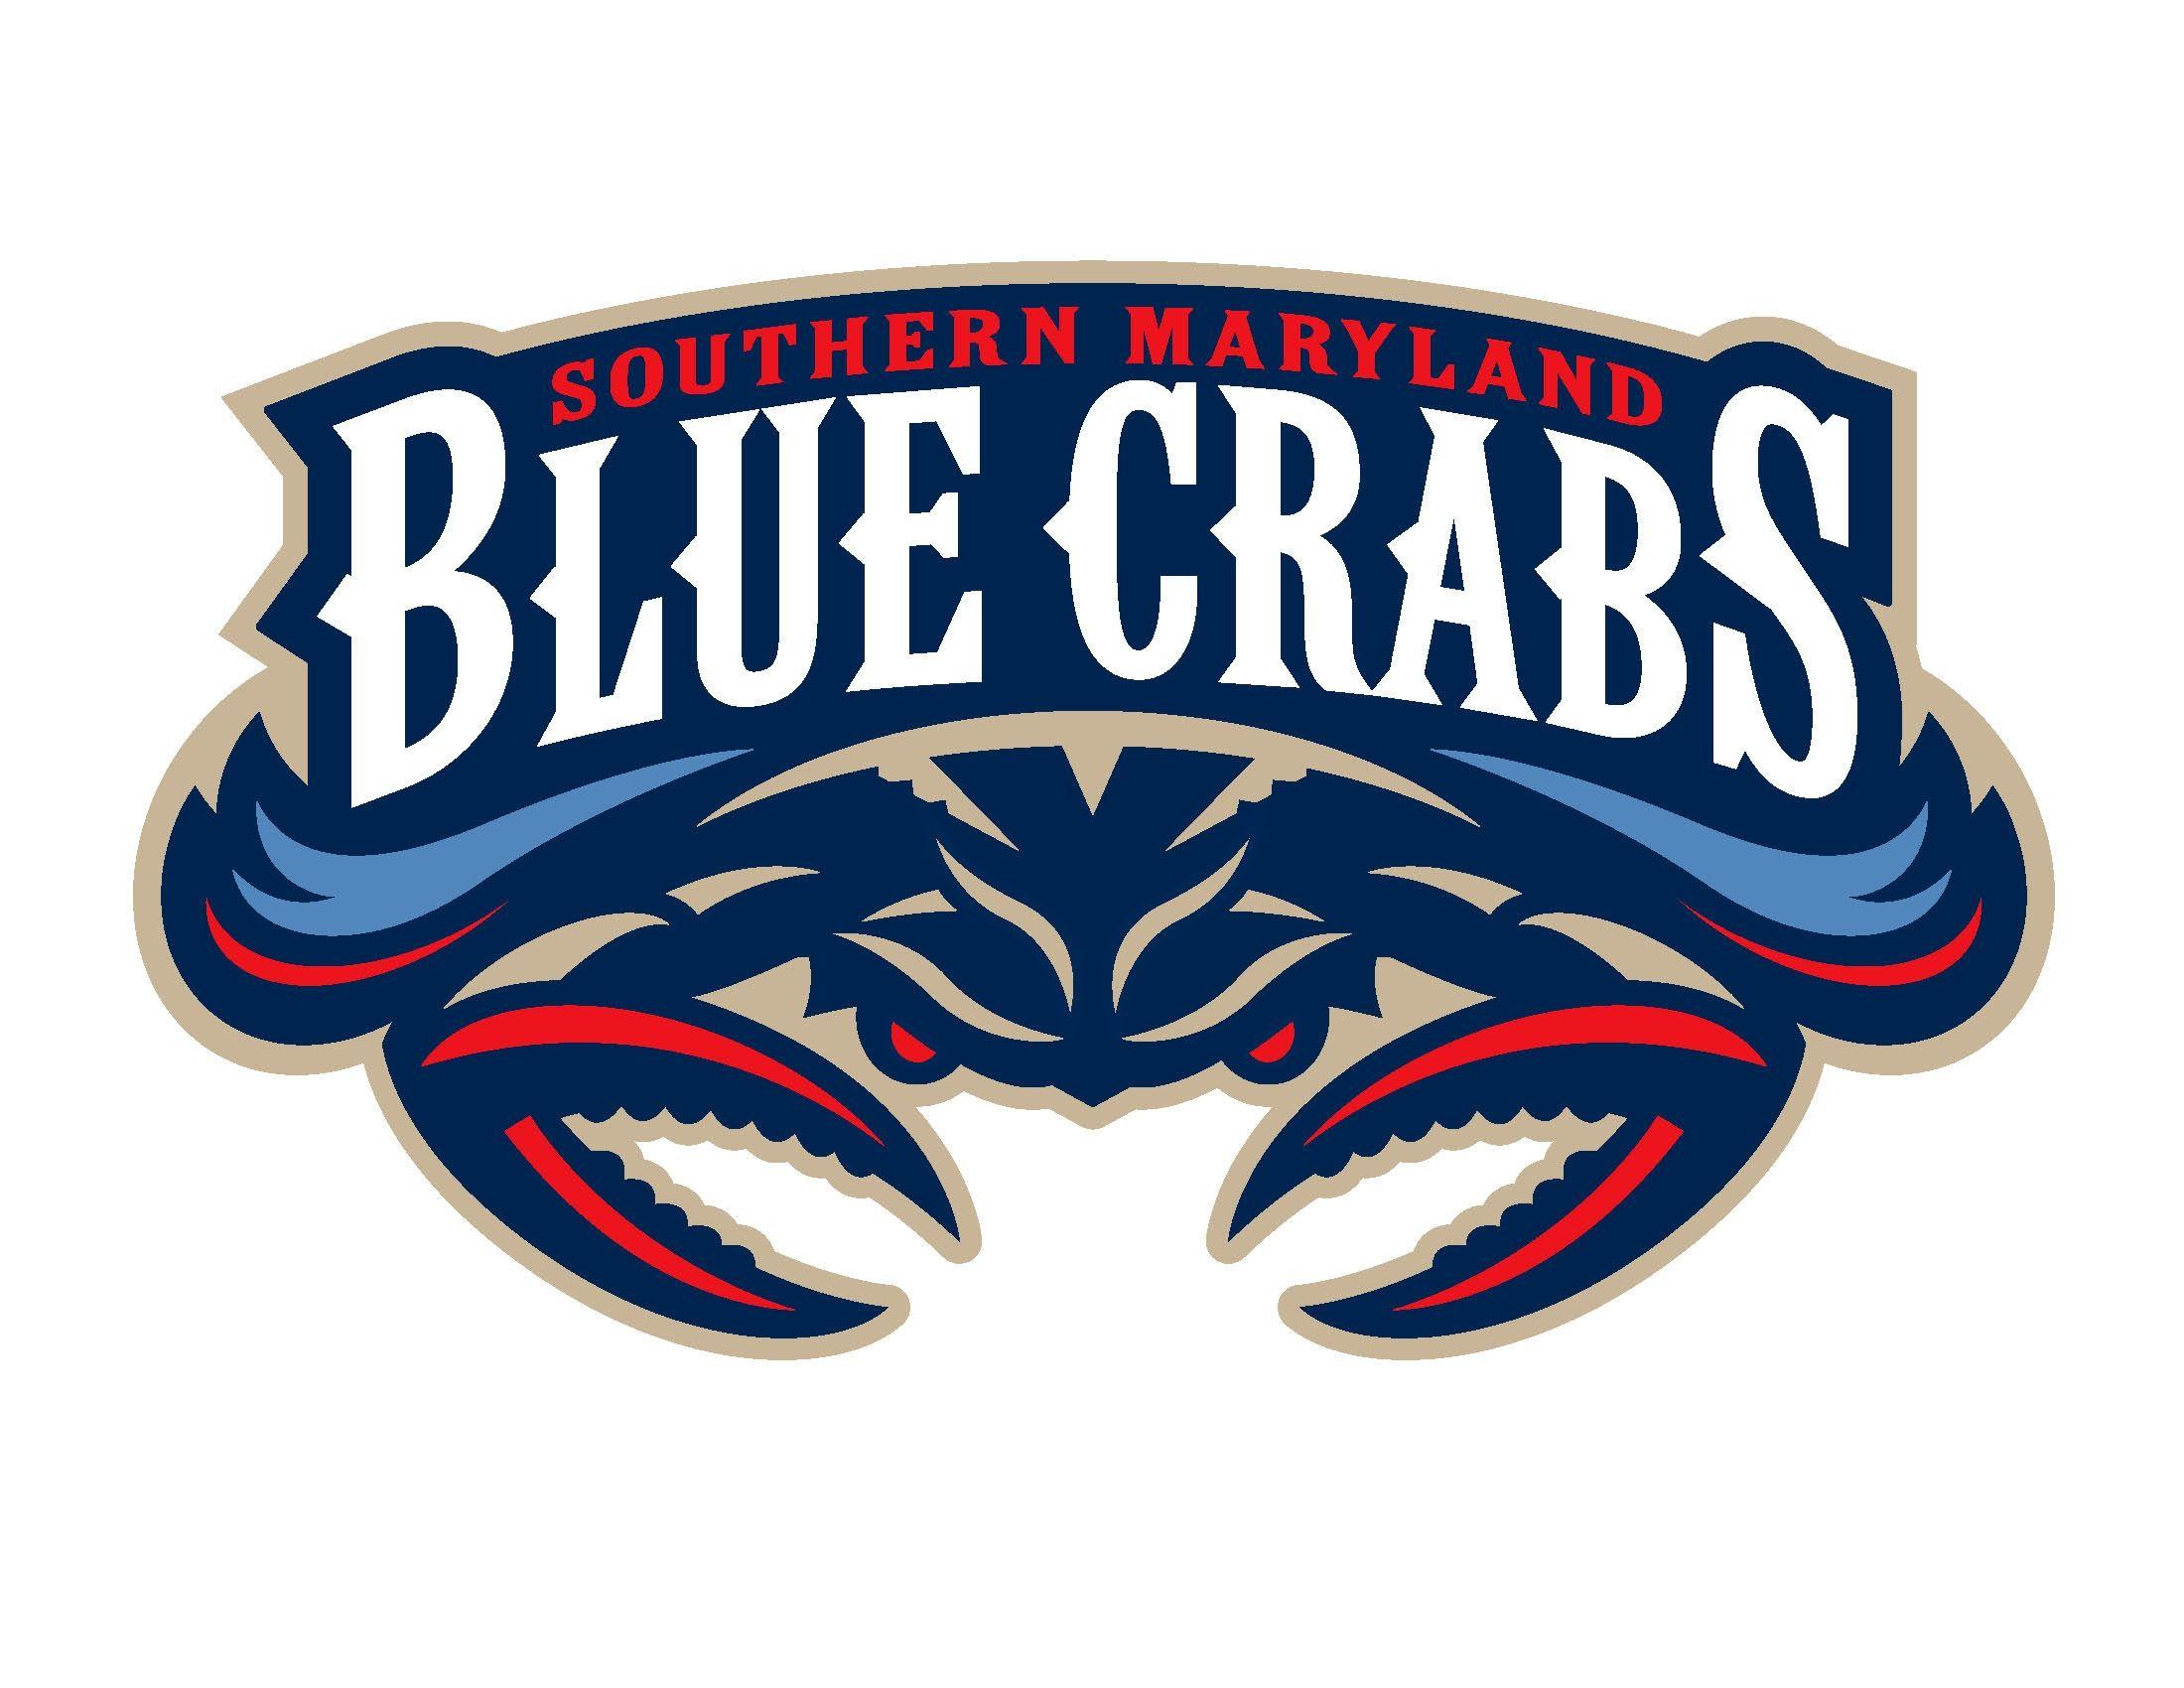 Crab Baseball Logo - Southern Maryland is well known for Blue Crabs and the team plays in ...